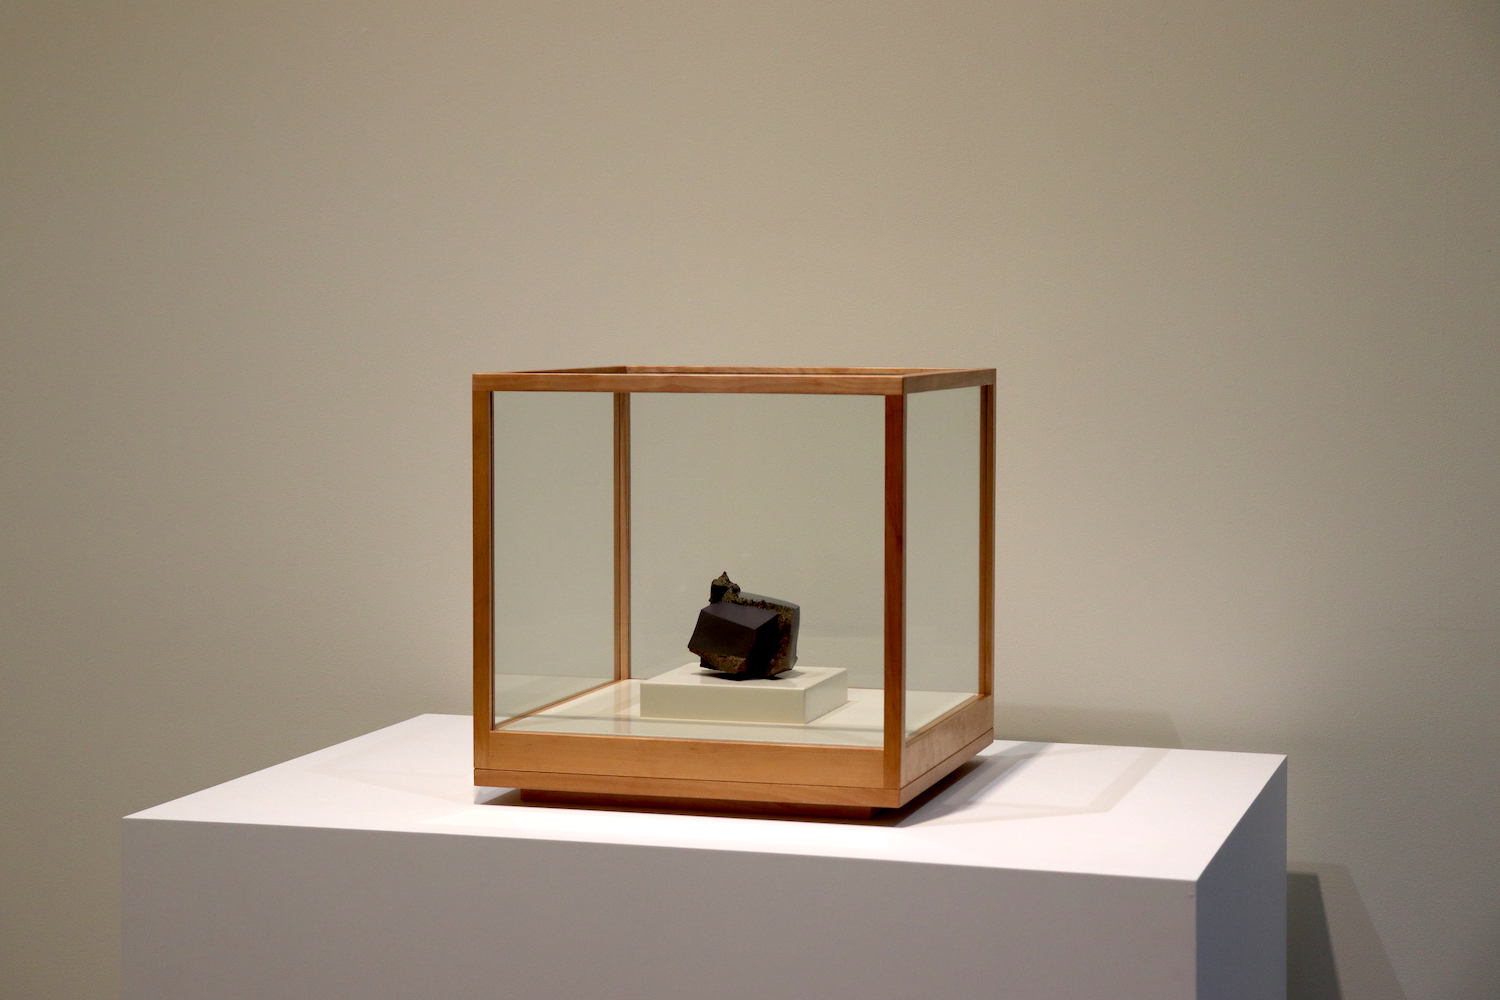 Kenneth Price, Edo, 1983, earthenware with hand-painted glaze in wooden display box, 13 x 10.8 x 11.3 cm